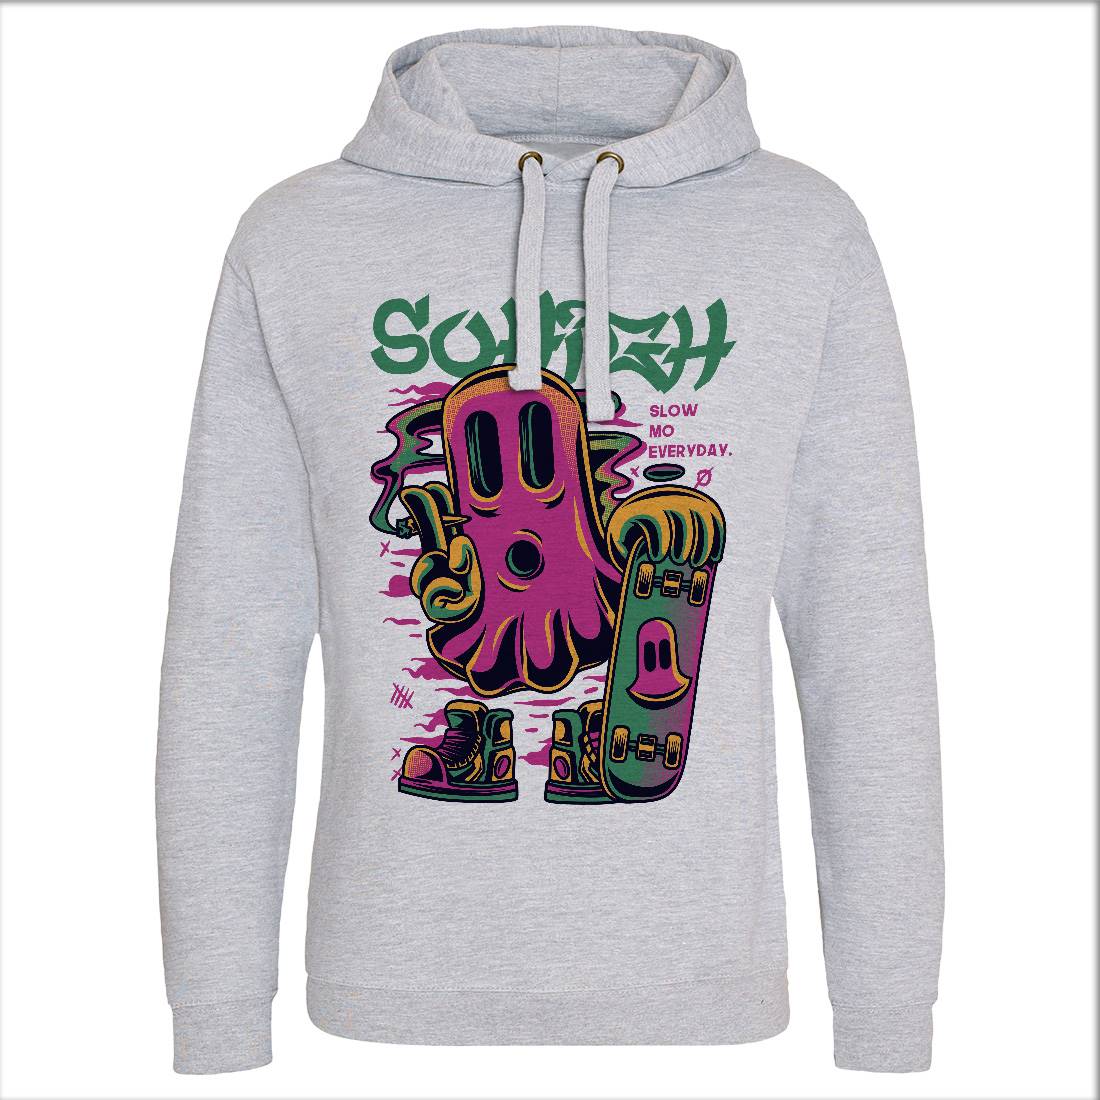 Ghost Mens Hoodie Without Pocket Skate D826